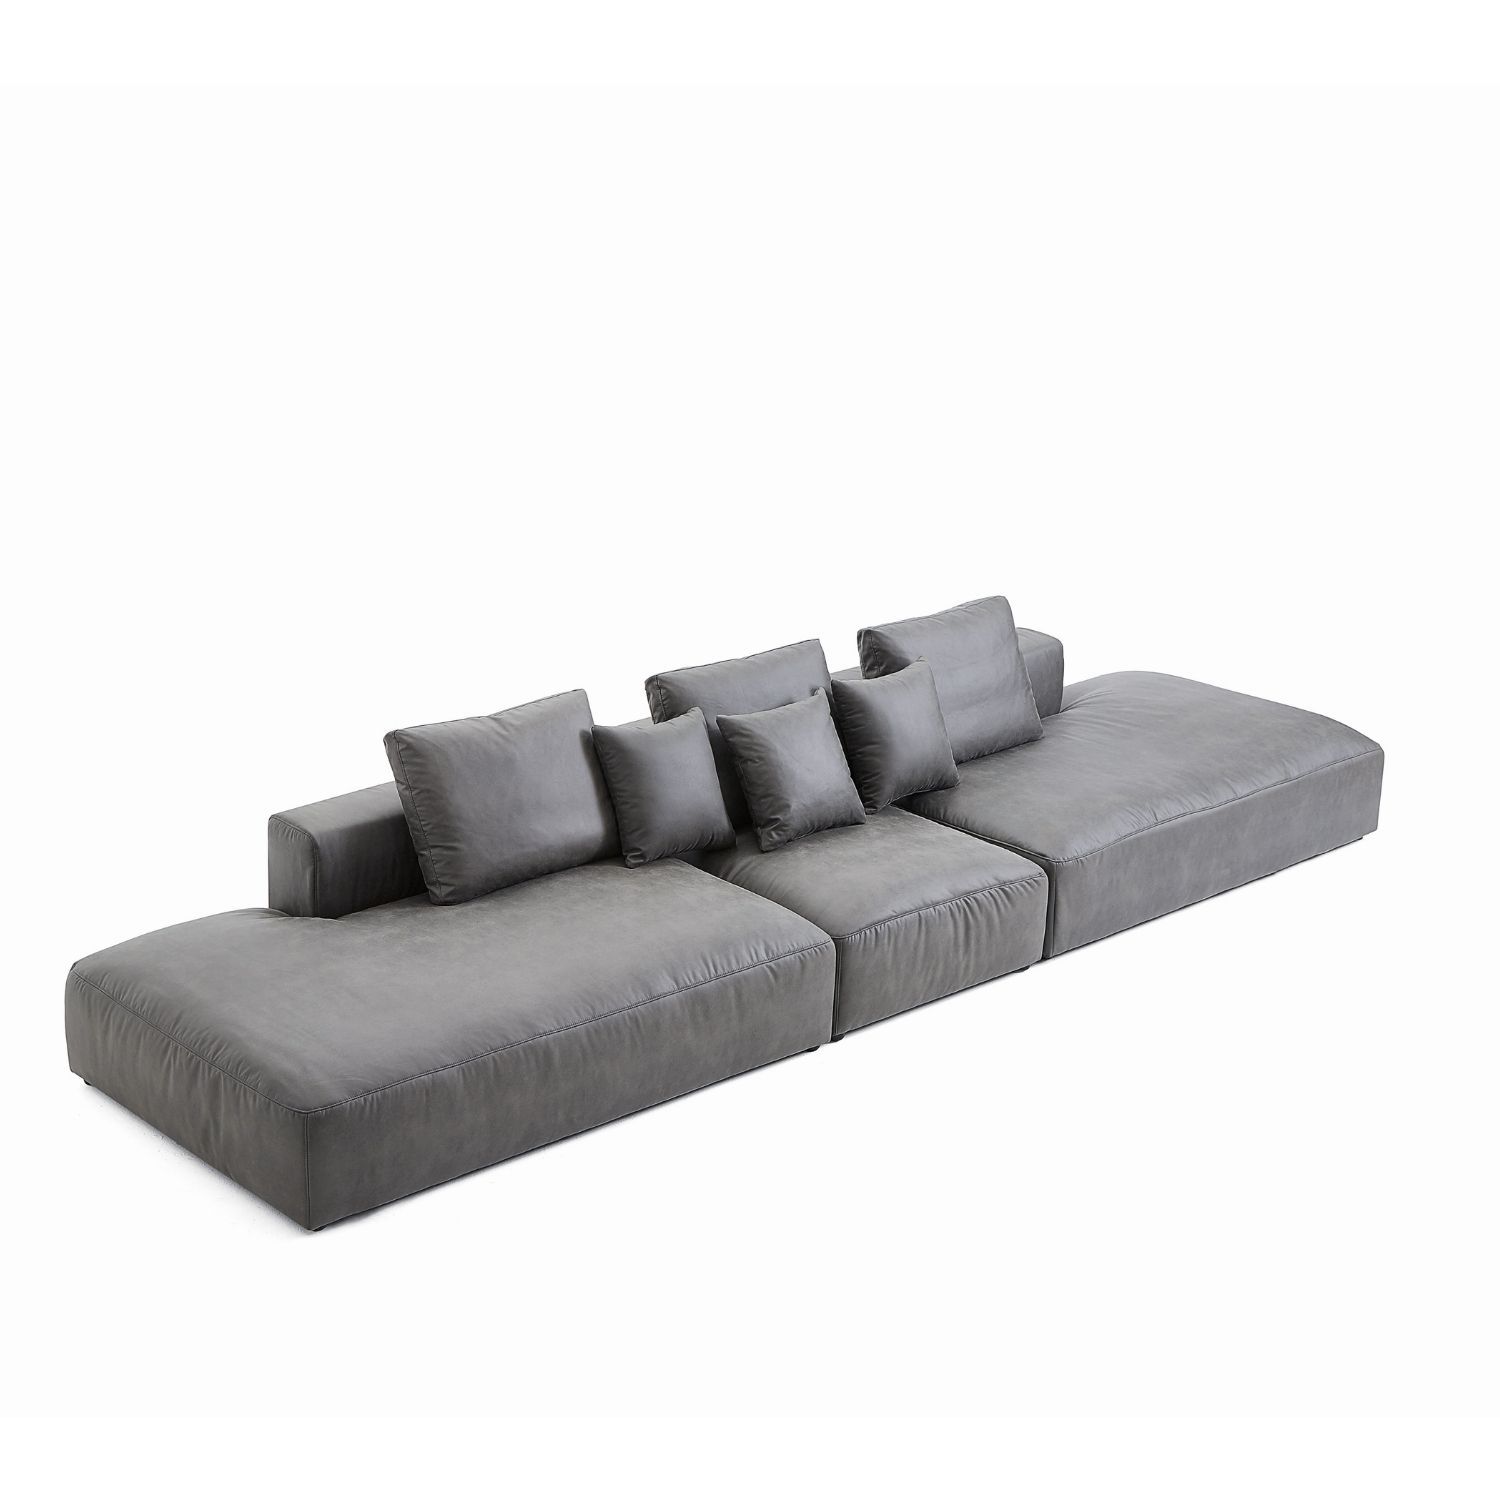 The 5th Lounger, Sofa, Foundry | Valyou Furniture 